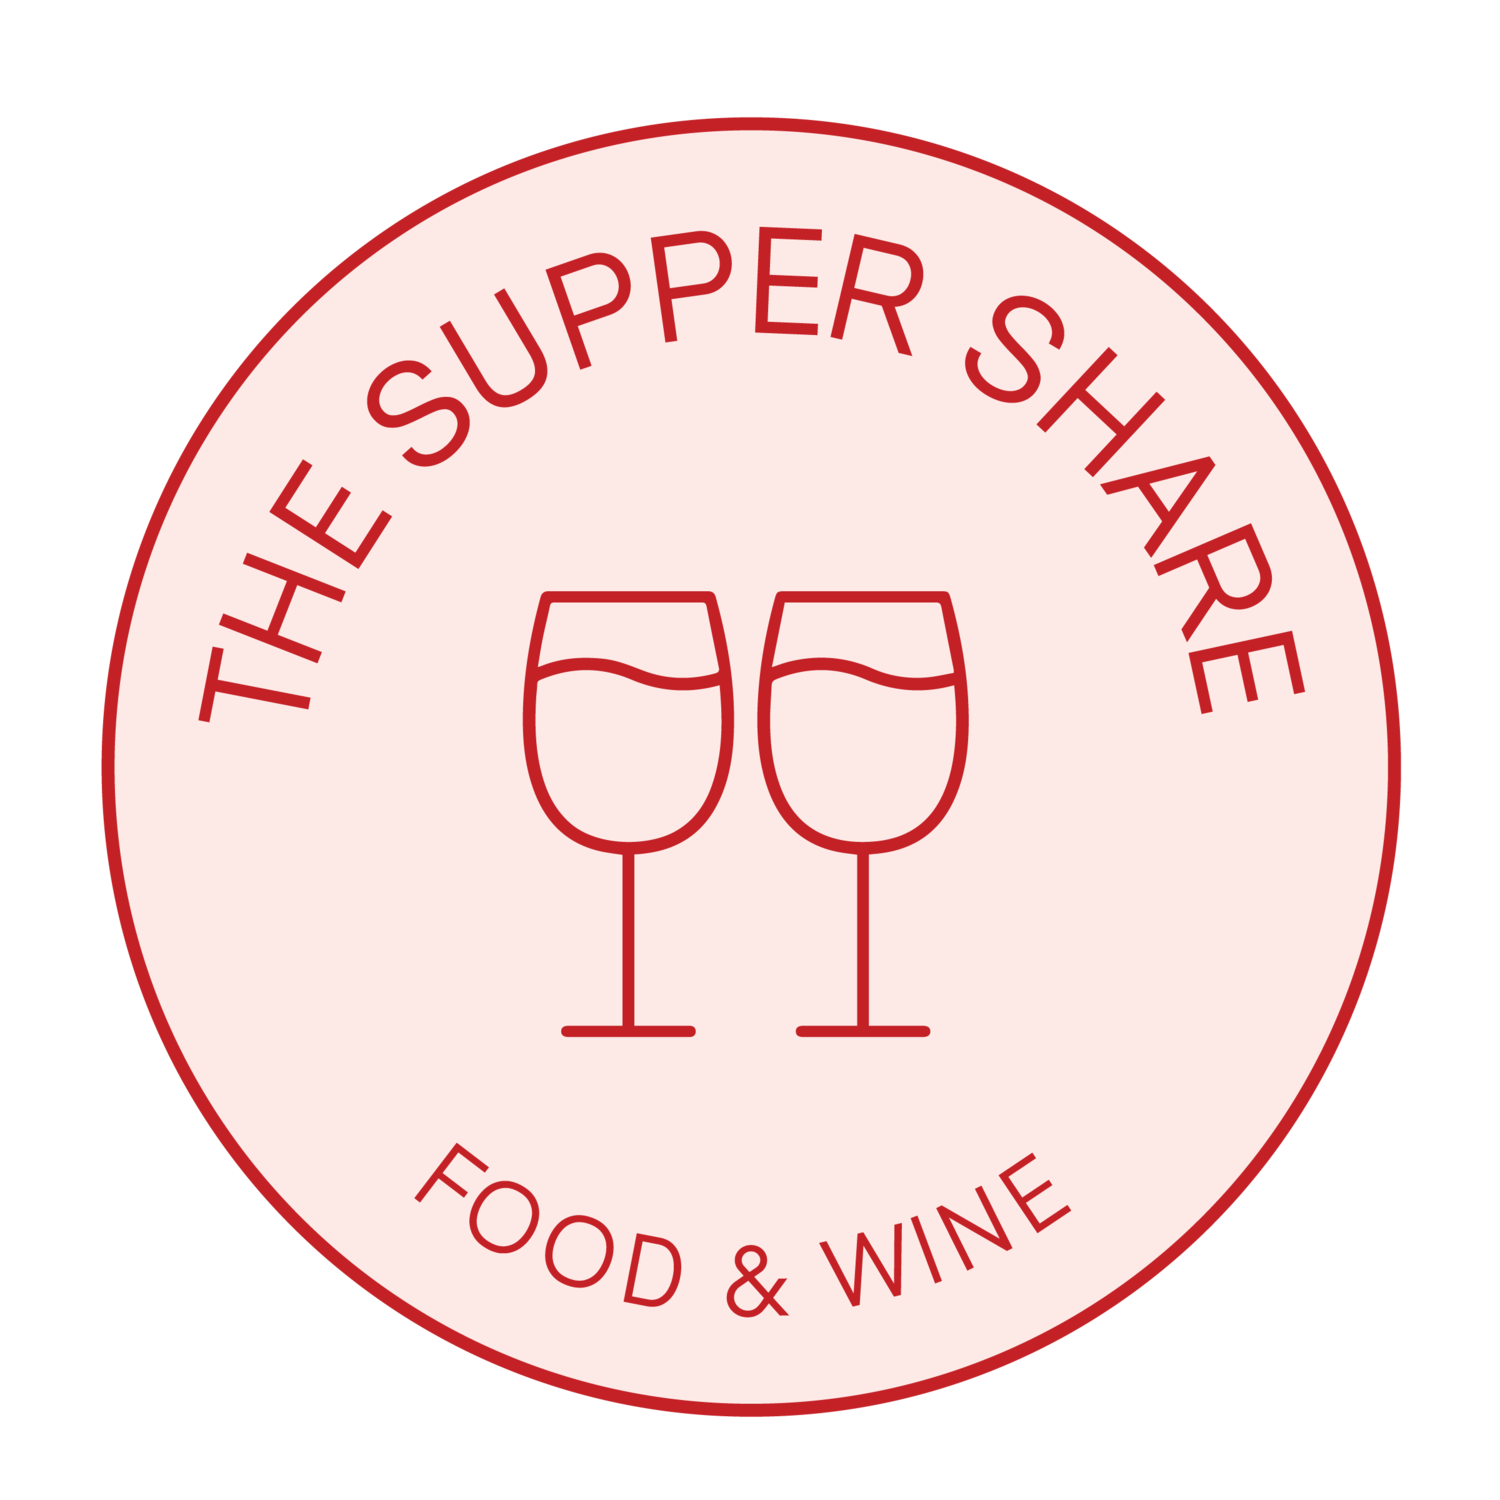 The SupperShare